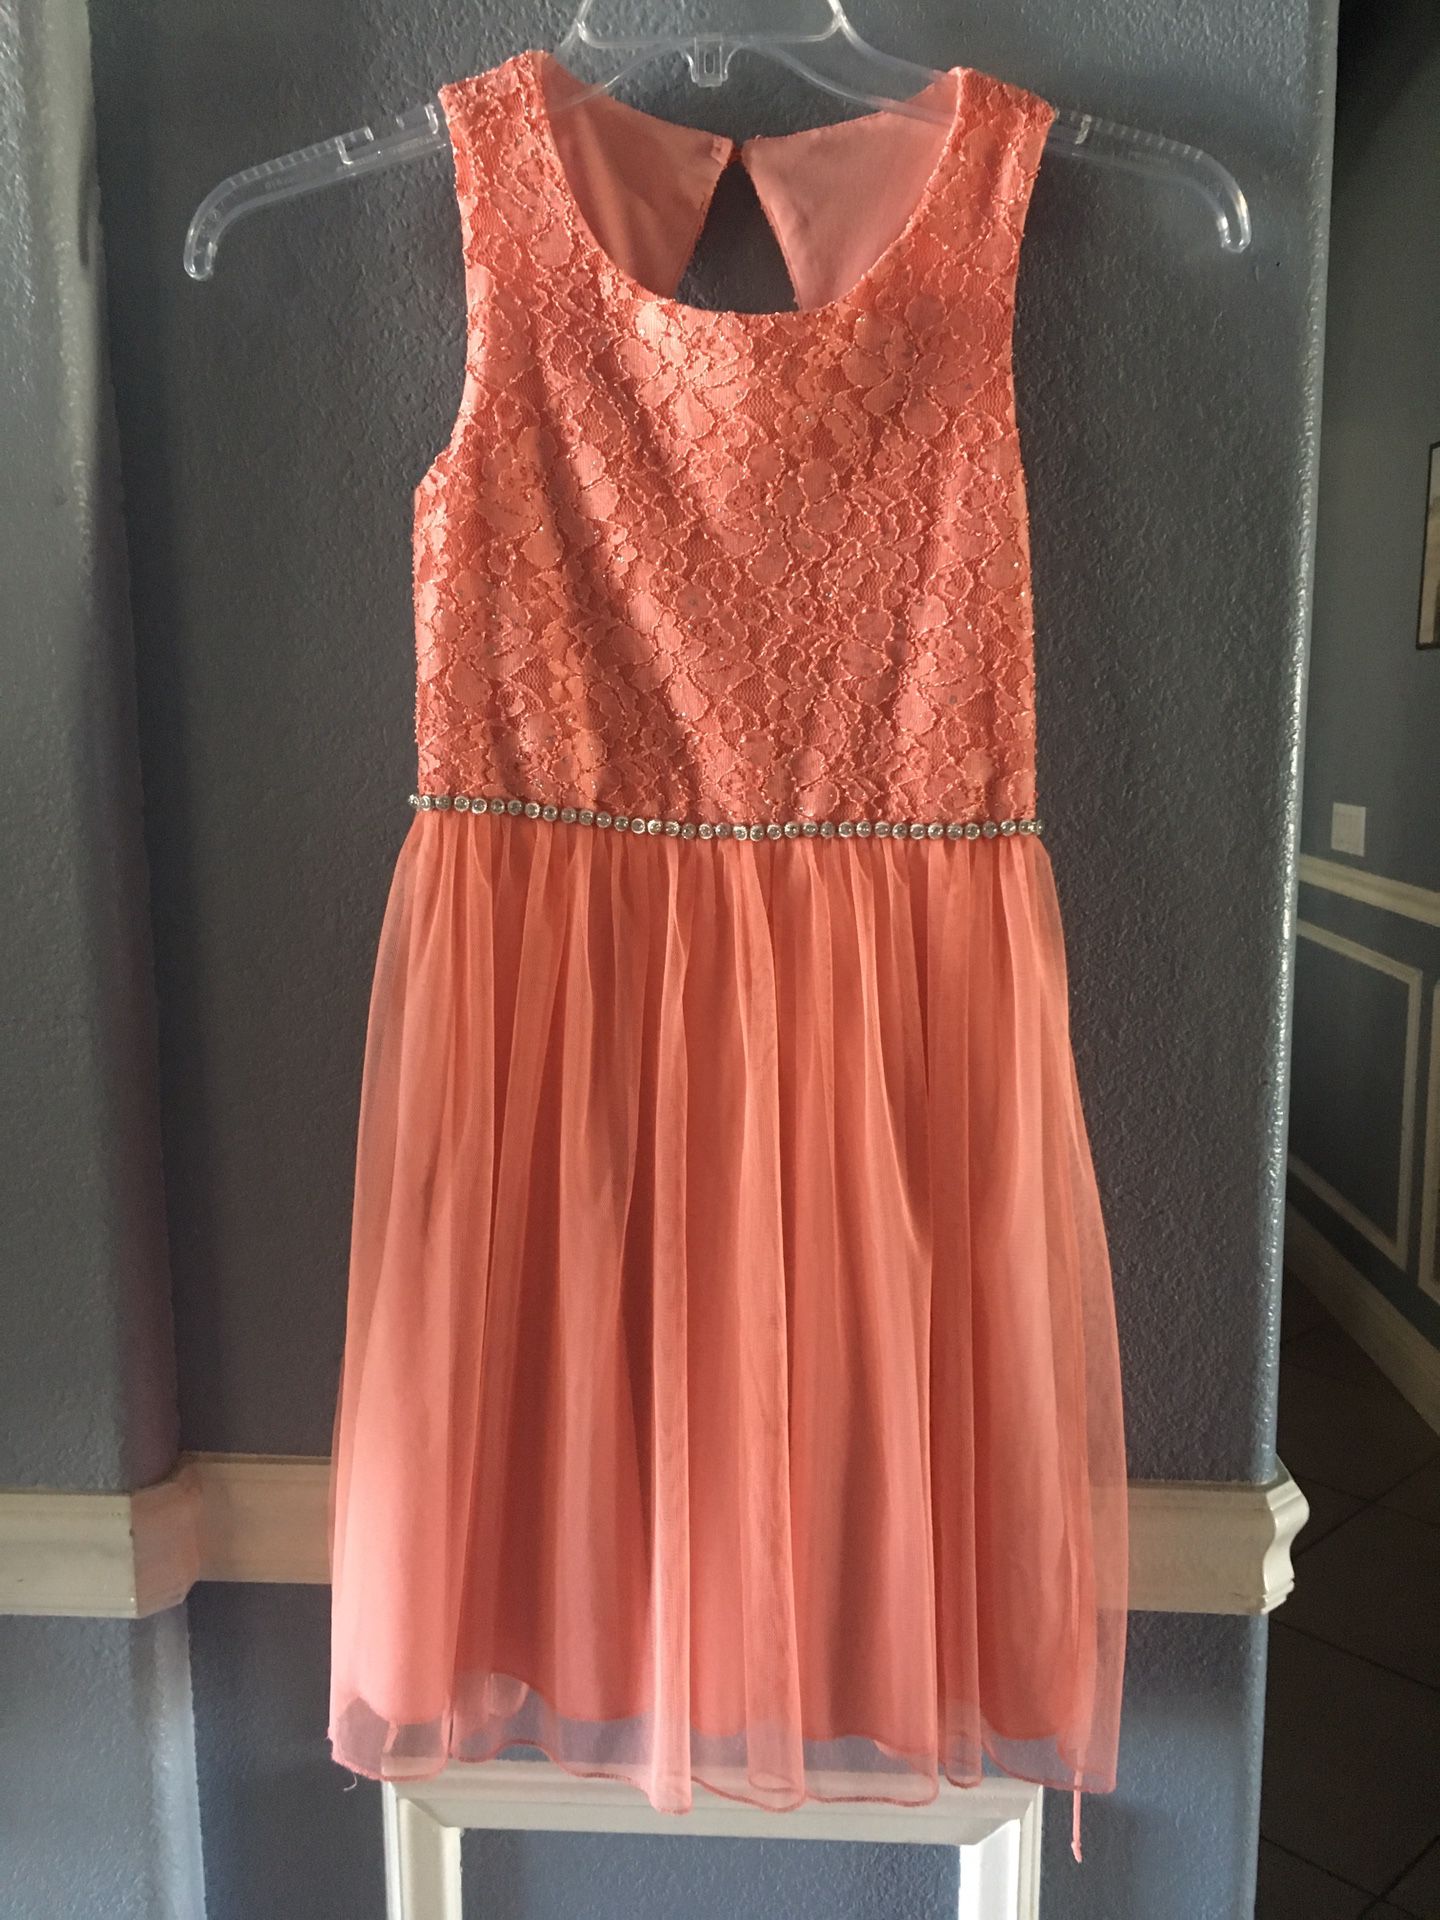 Peach Easter Spring Dress size 10